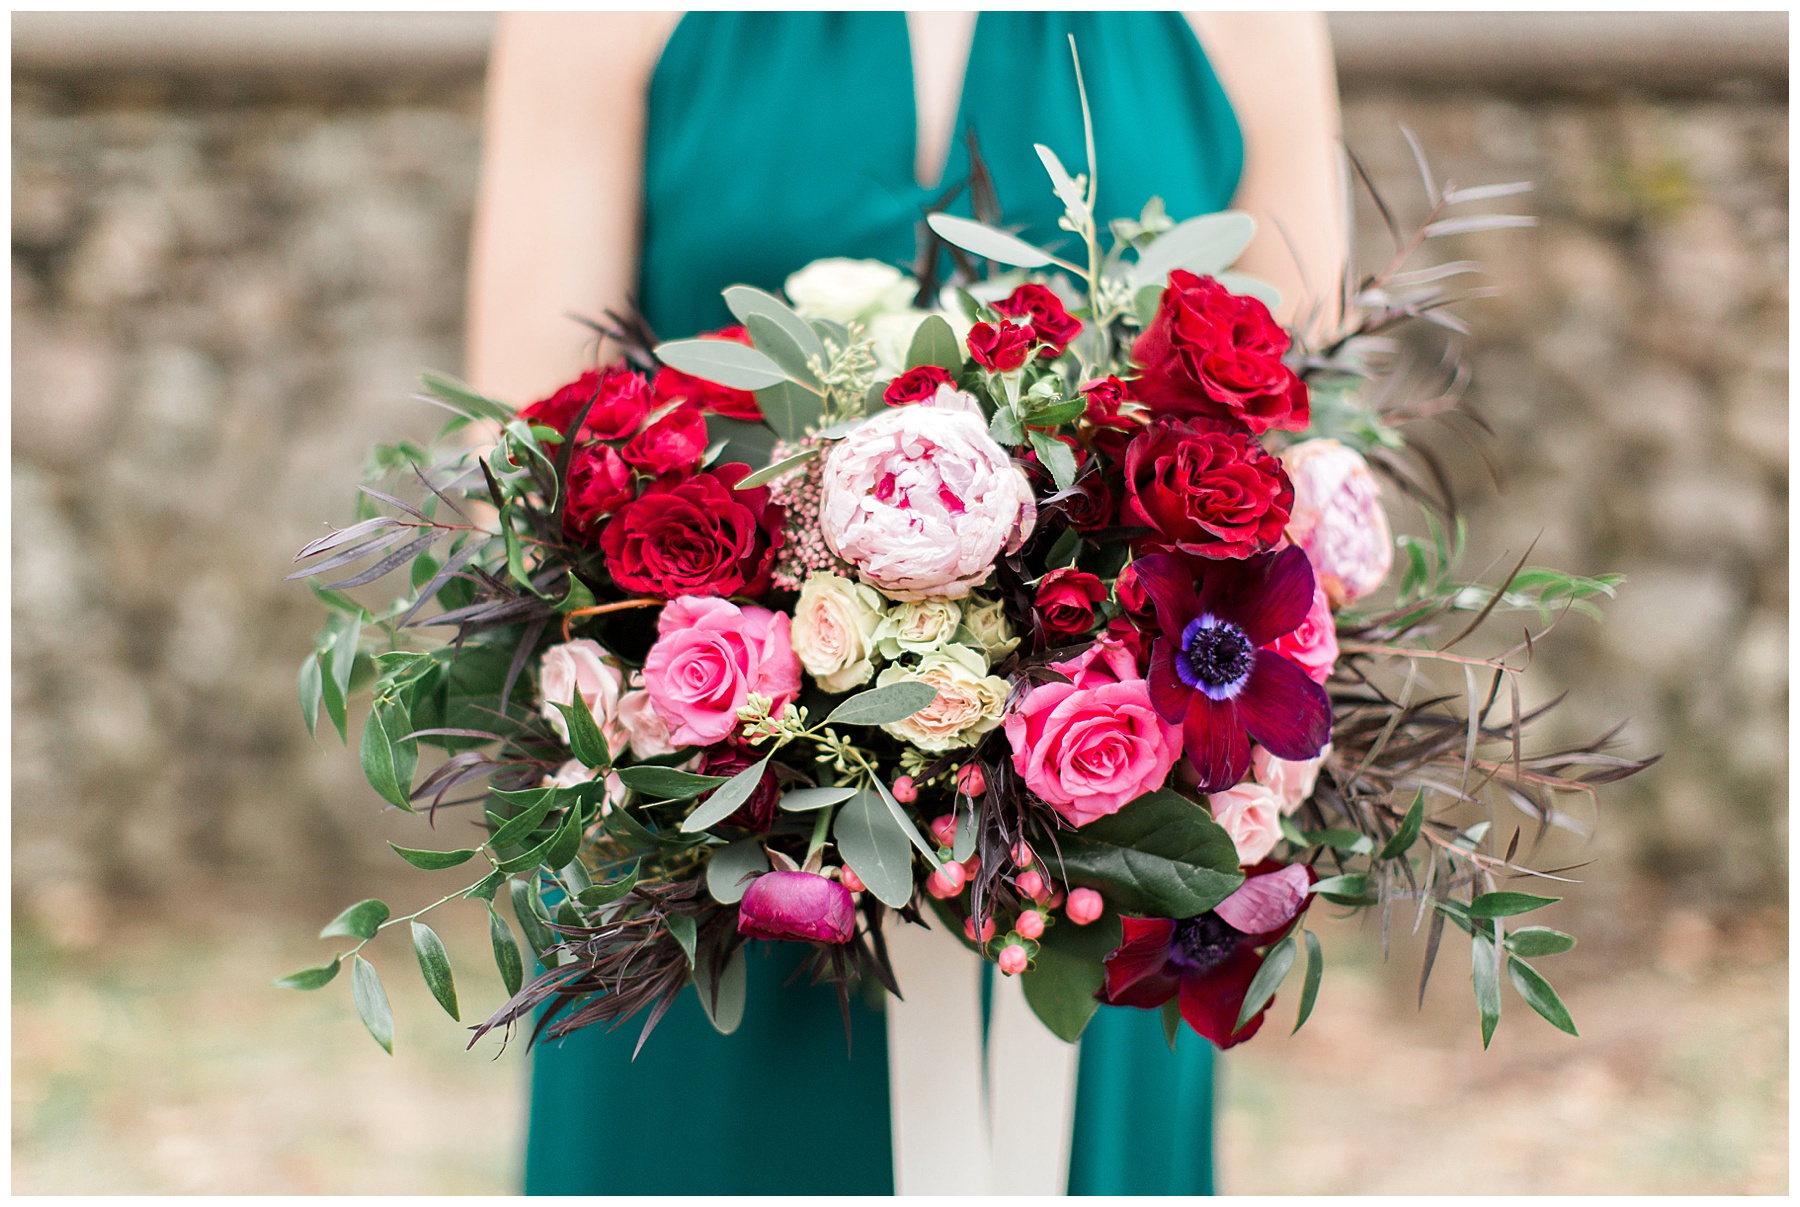 Wedding_bouquet_bridal_flowers_Kristina_Staal_photography_Waveny_House_new_canaan_connecticut.jpg